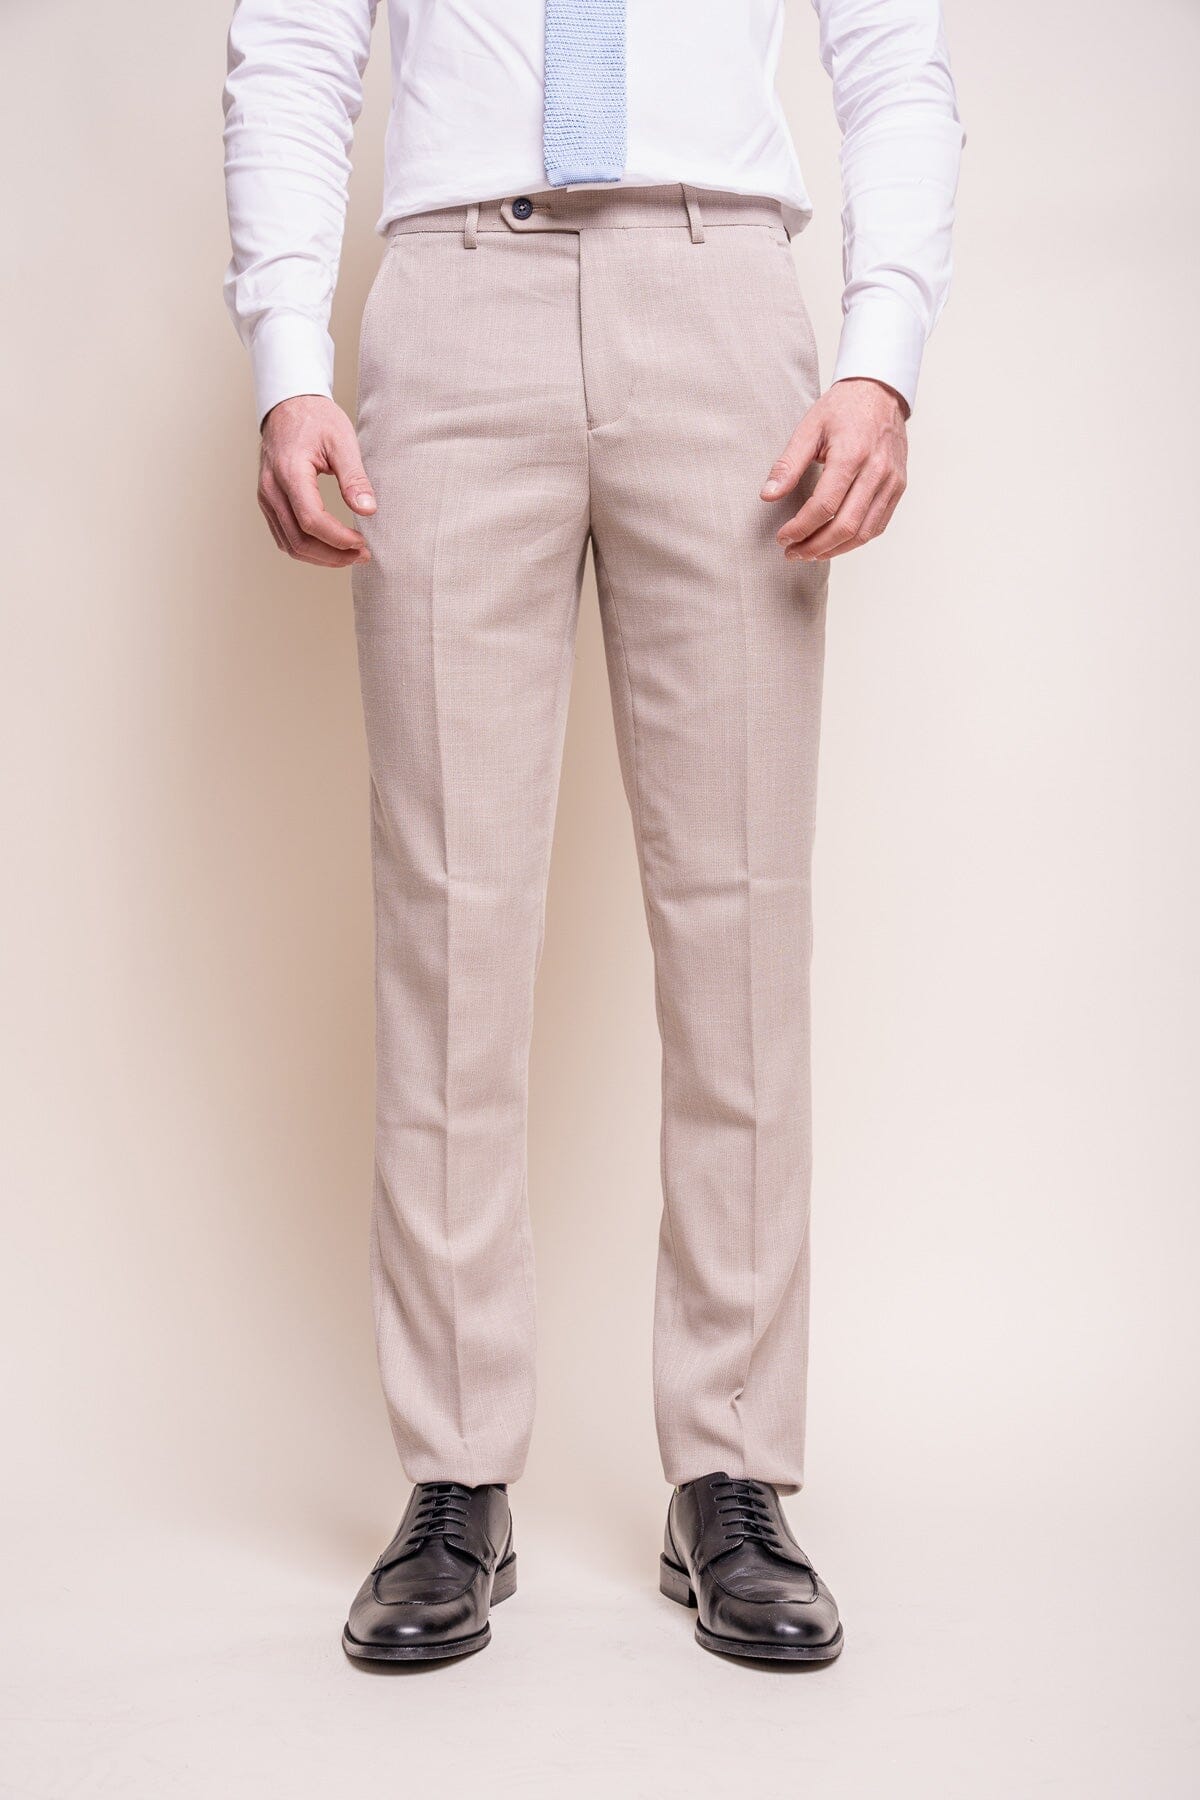 Miami Beige Trousers - Trousers - 28R 